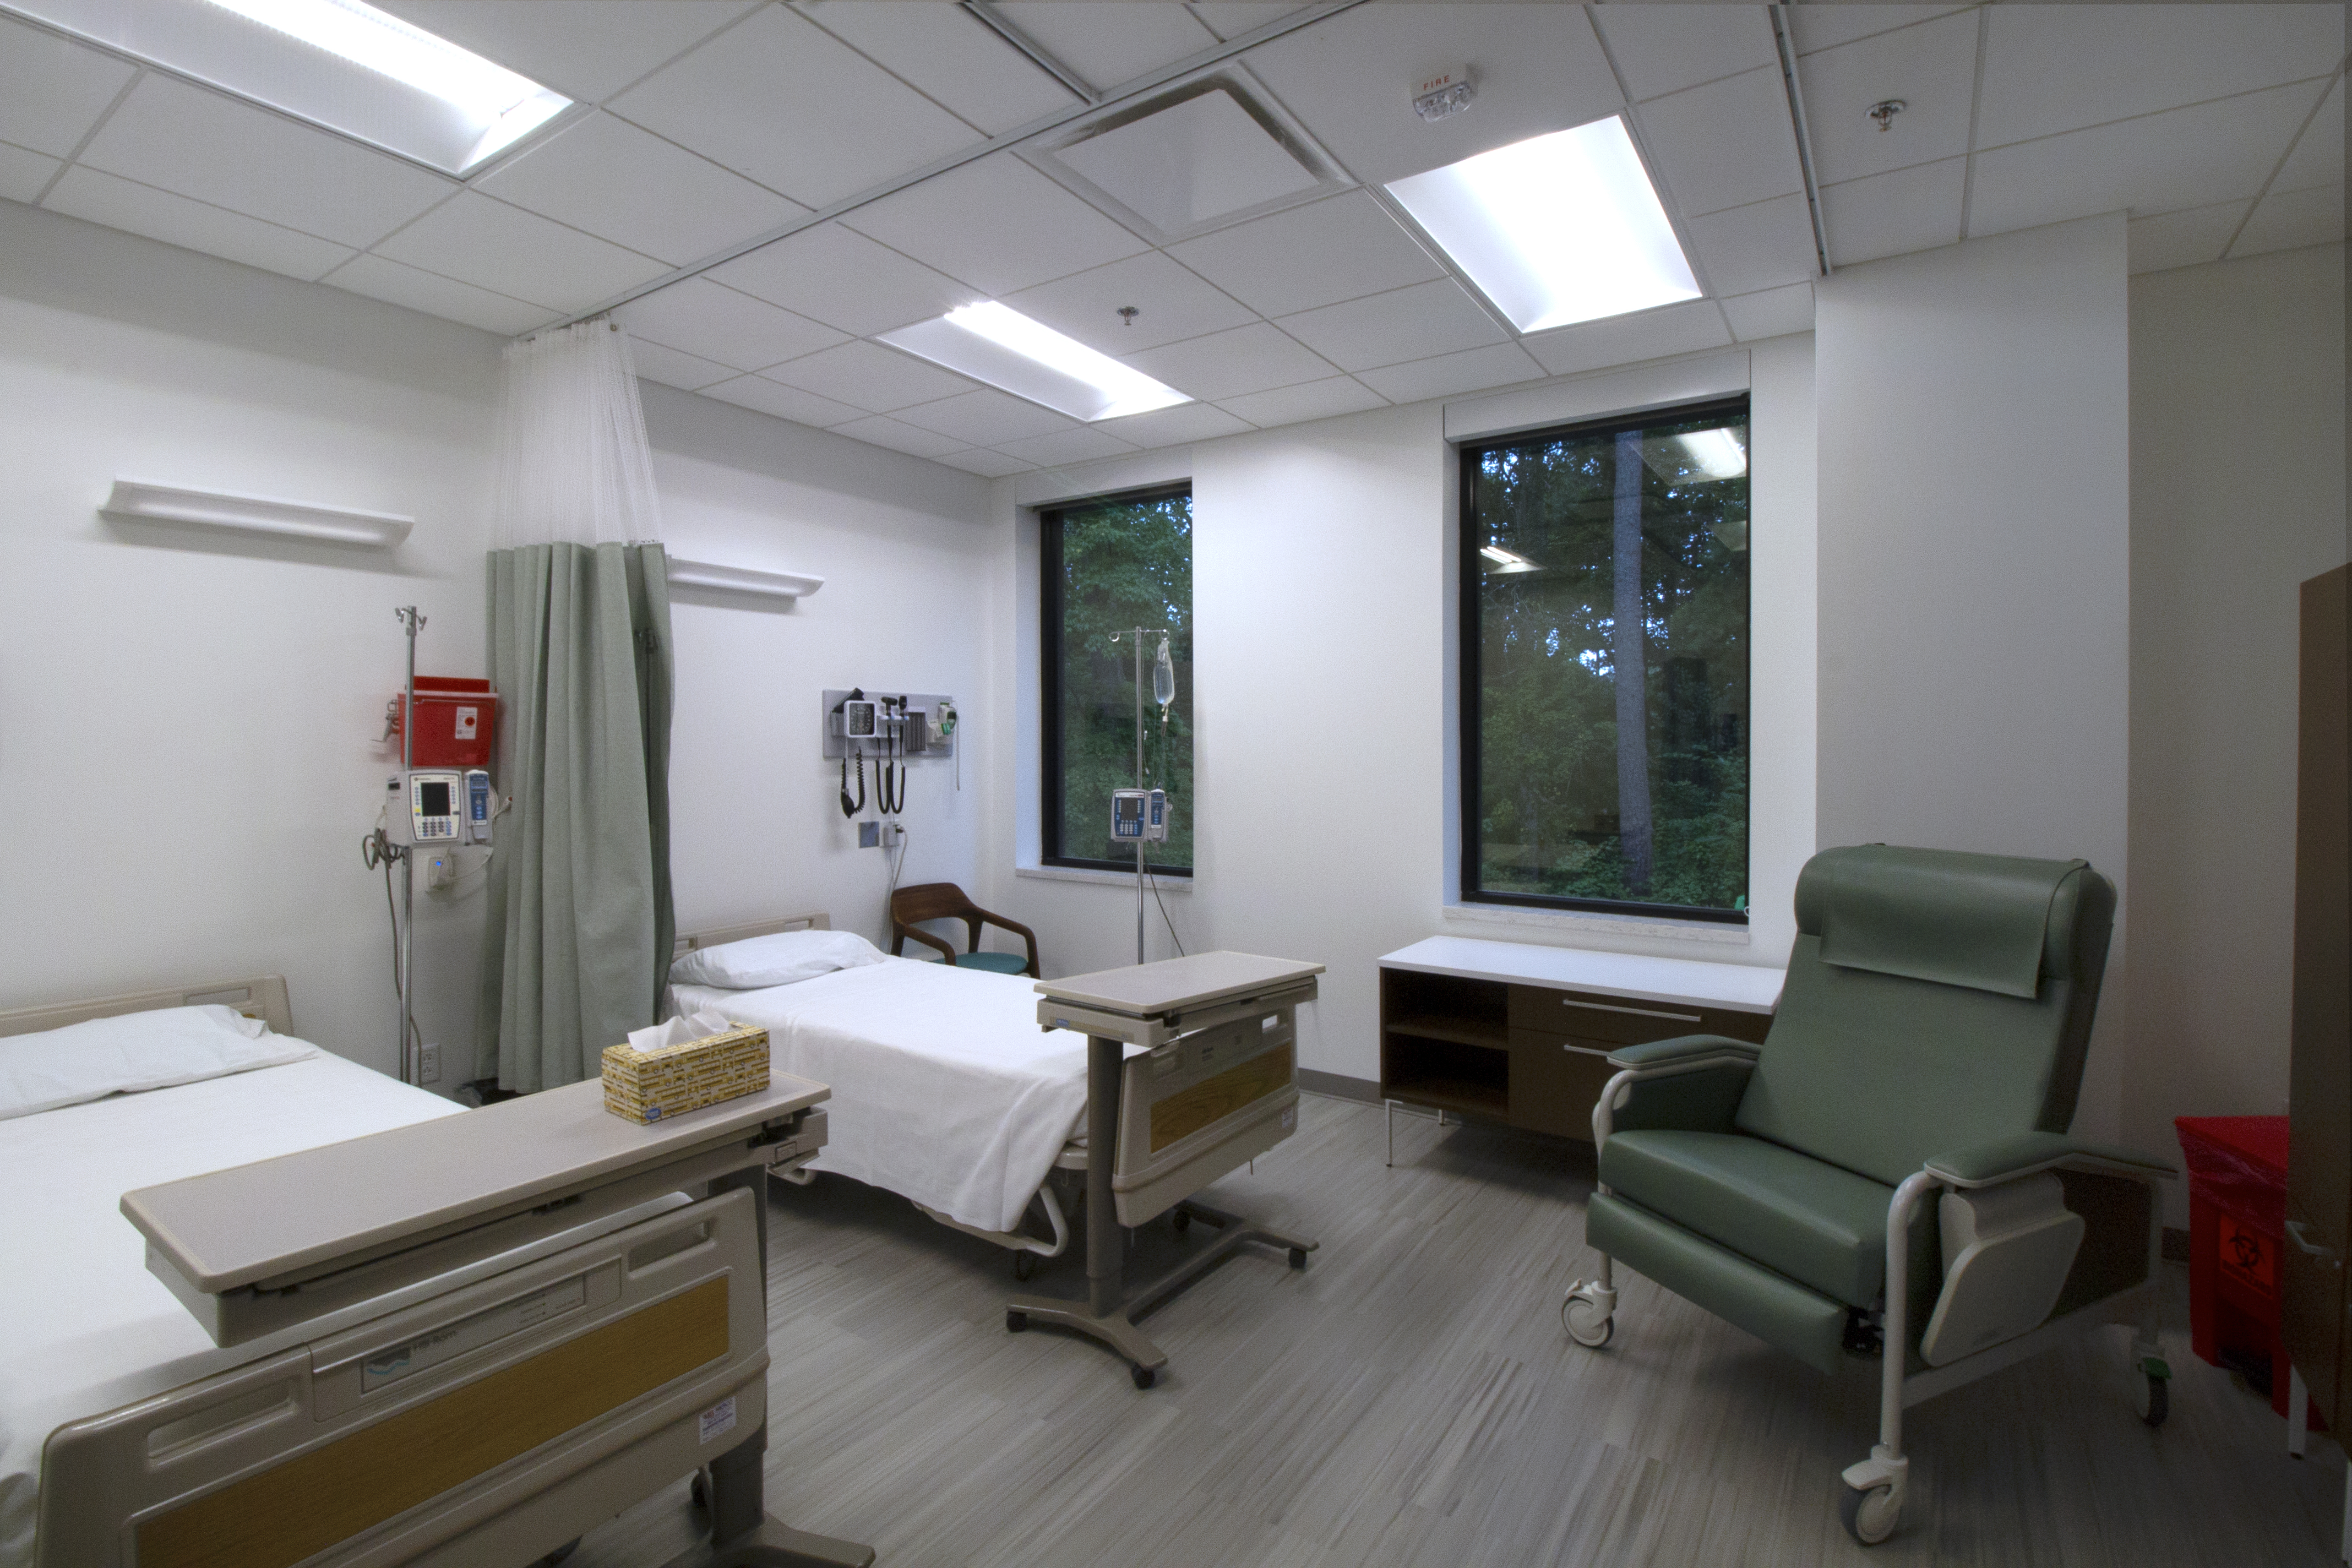 : Recovery room in the McLeod Tyler Wellness Center containing hospital beds next to two large windows, medical equipment on the walls and a curtain dividing the room 